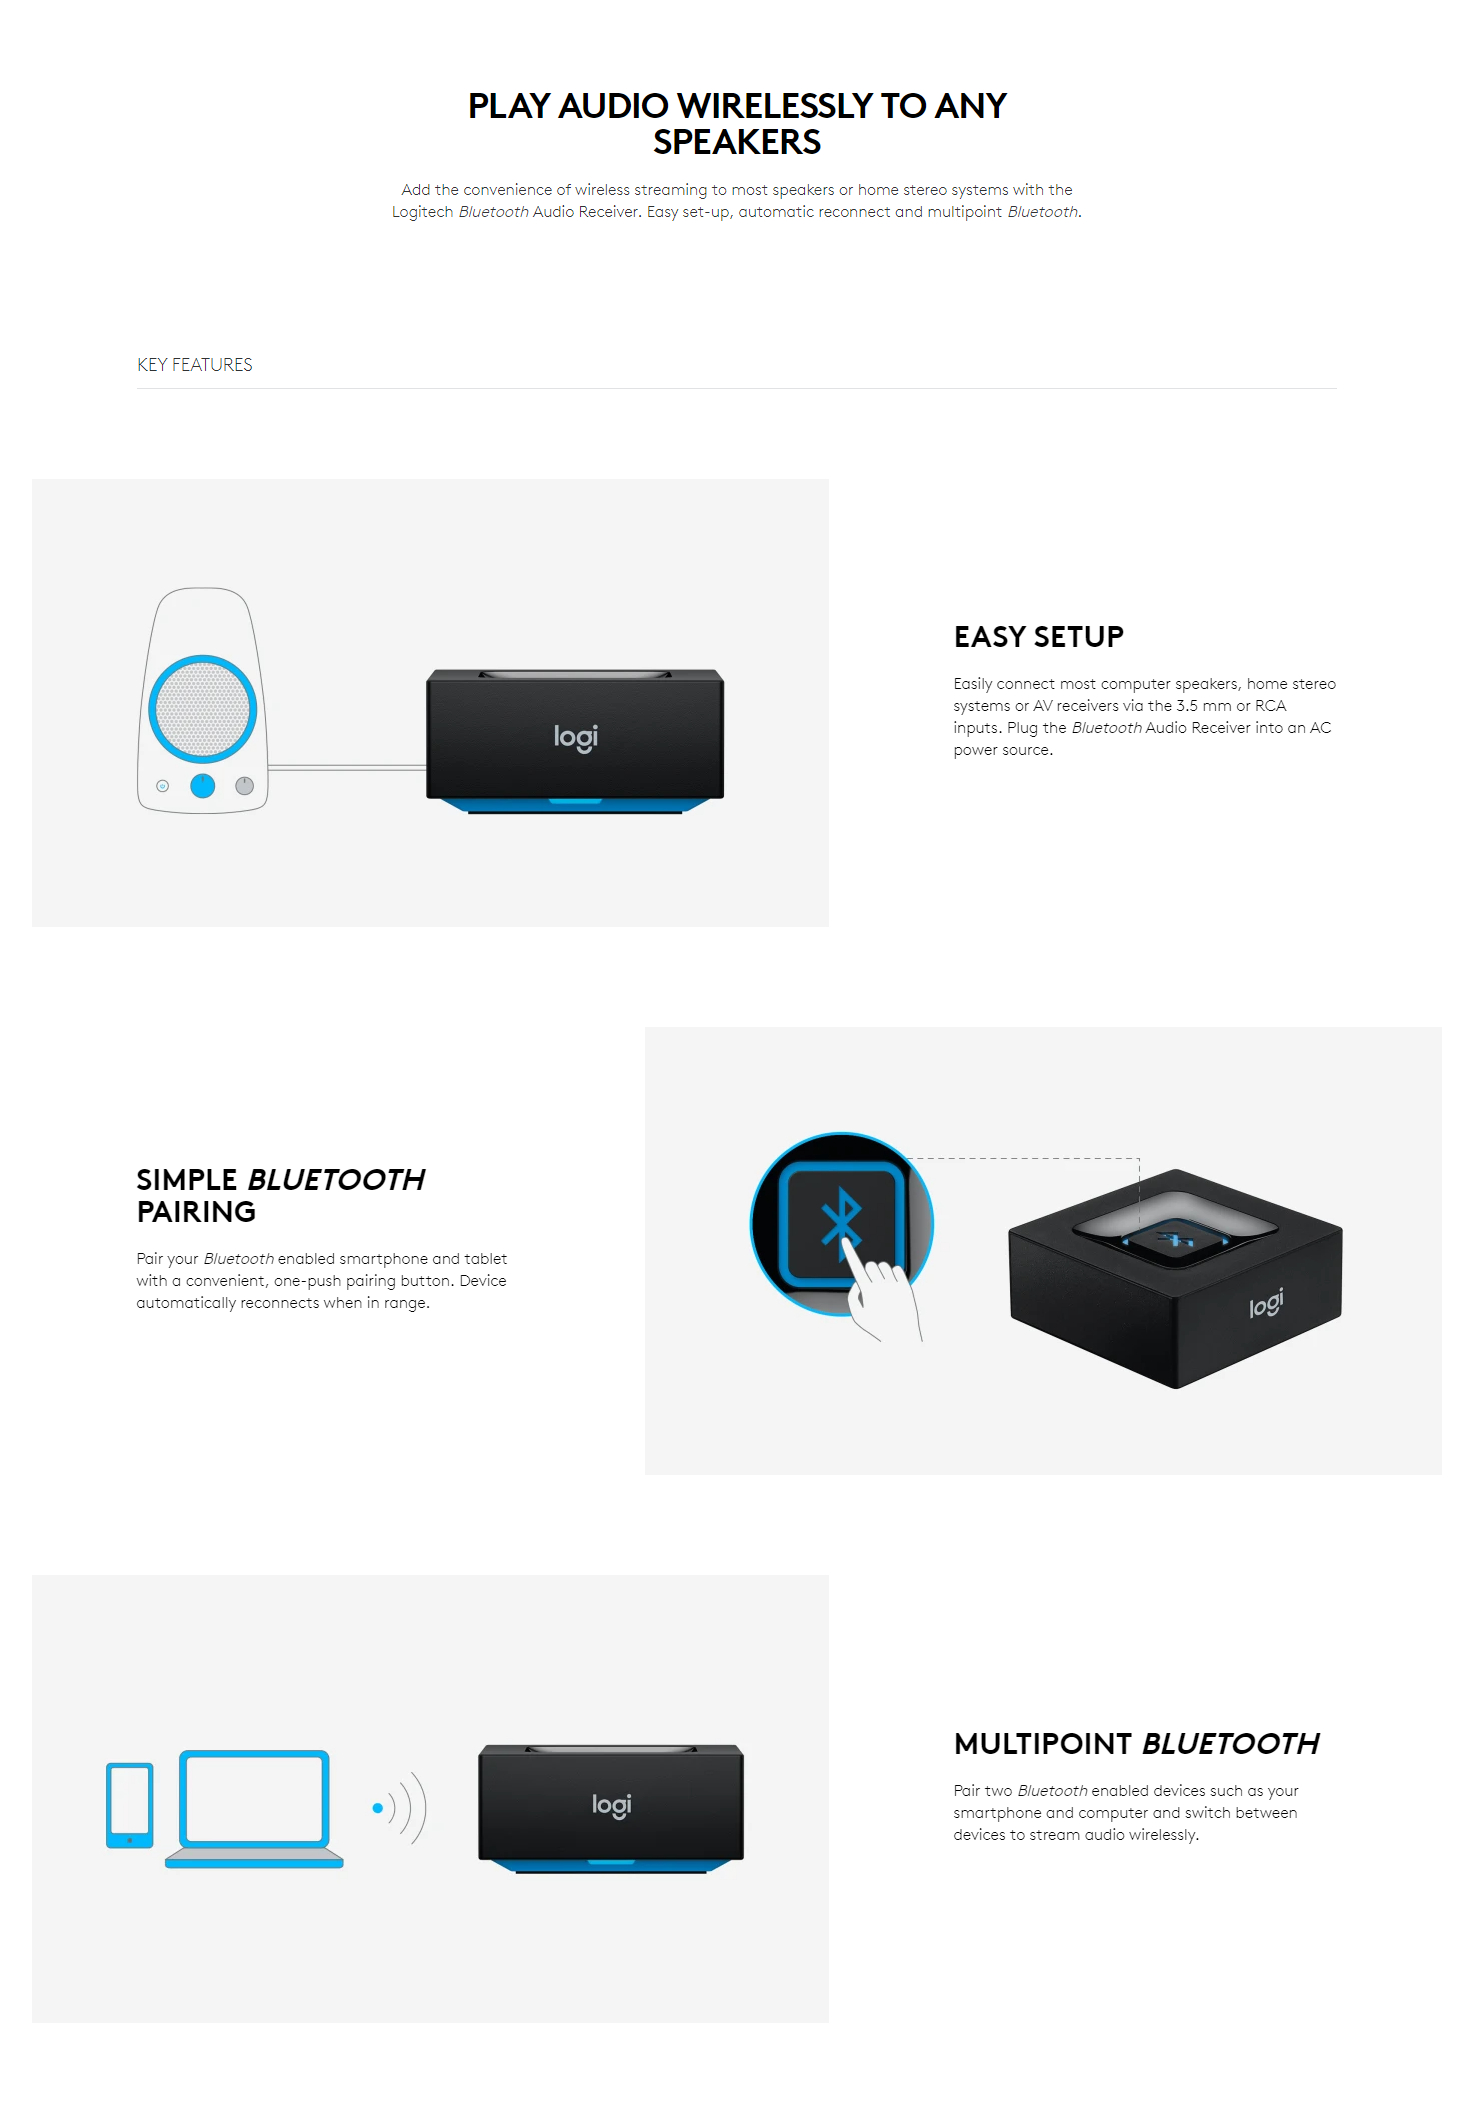 A large marketing image providing additional information about the product Logitech Bluetooth Audio Adapter - Additional alt info not provided